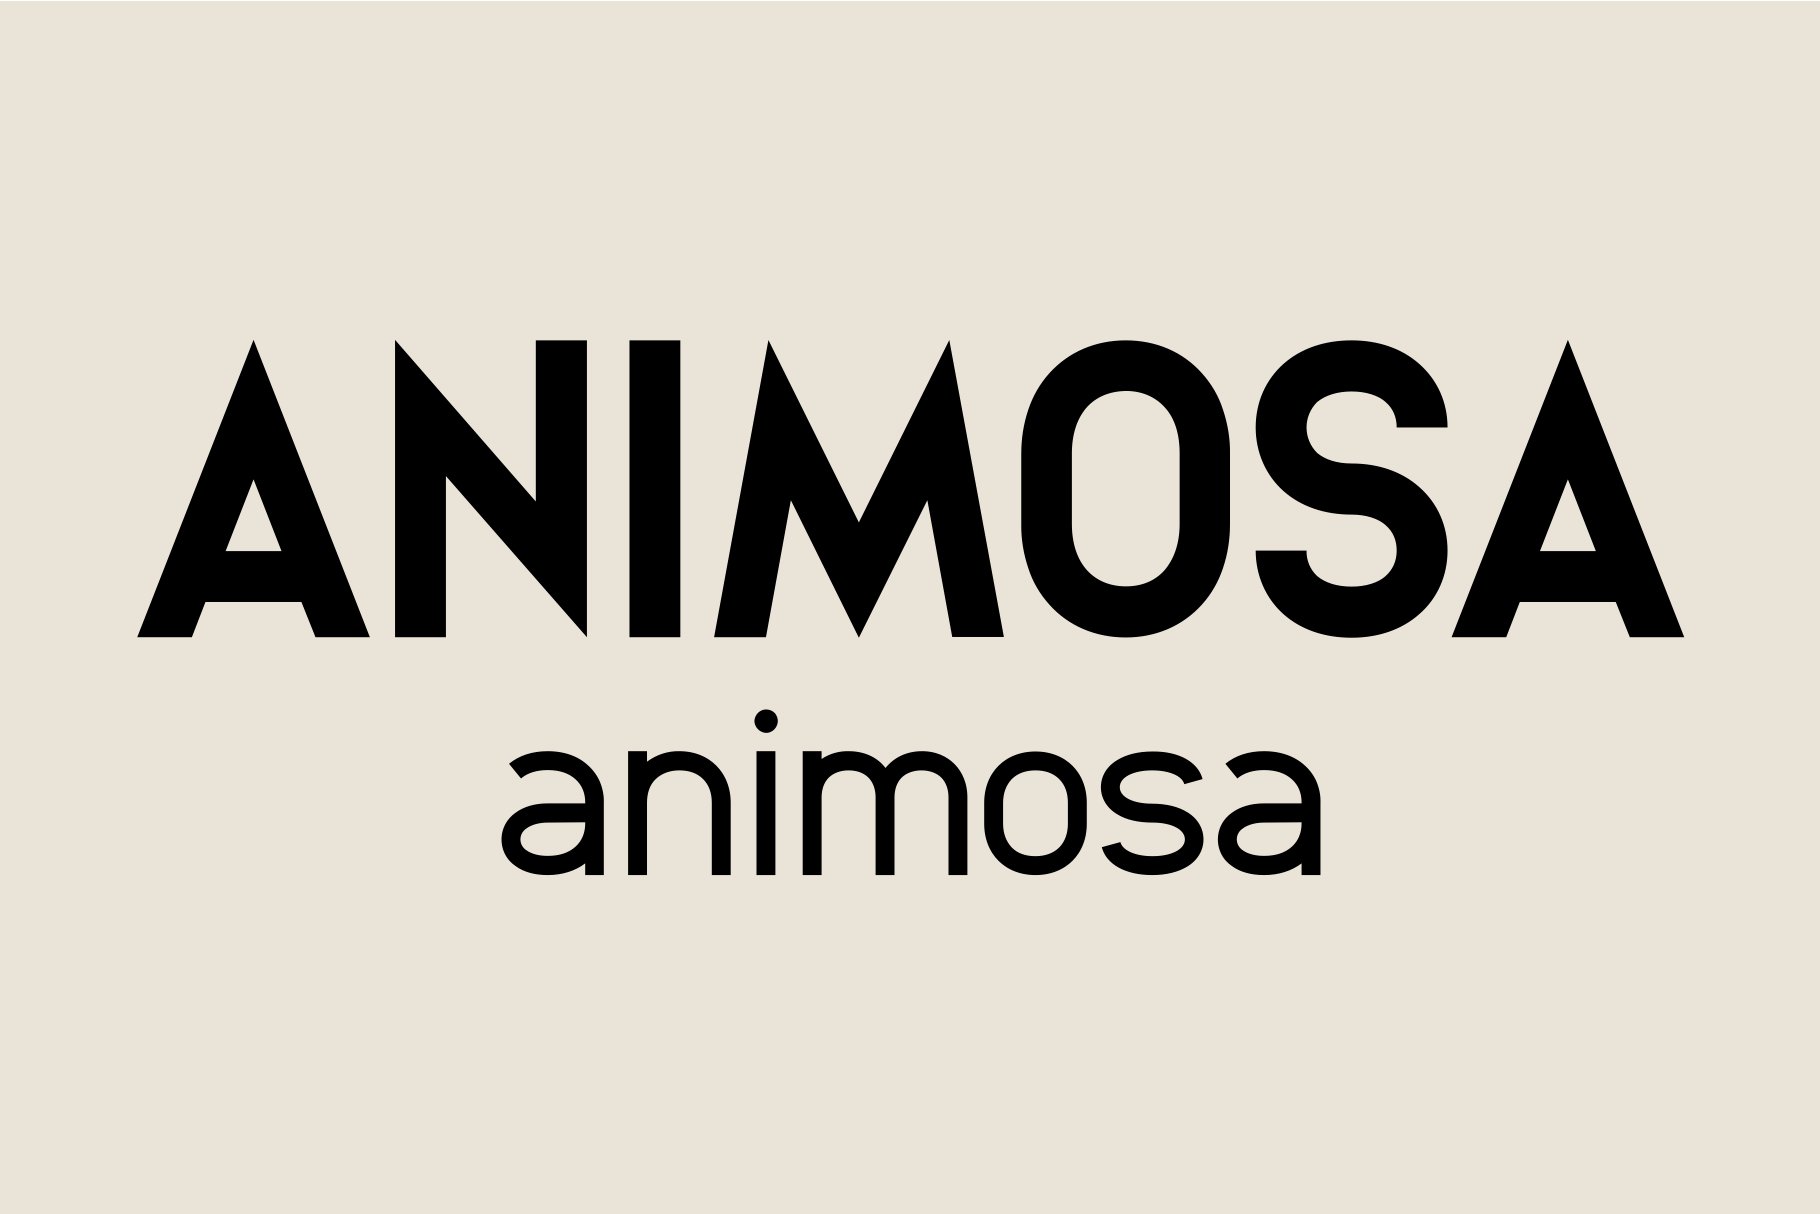 Animosa – Font Family cover image.